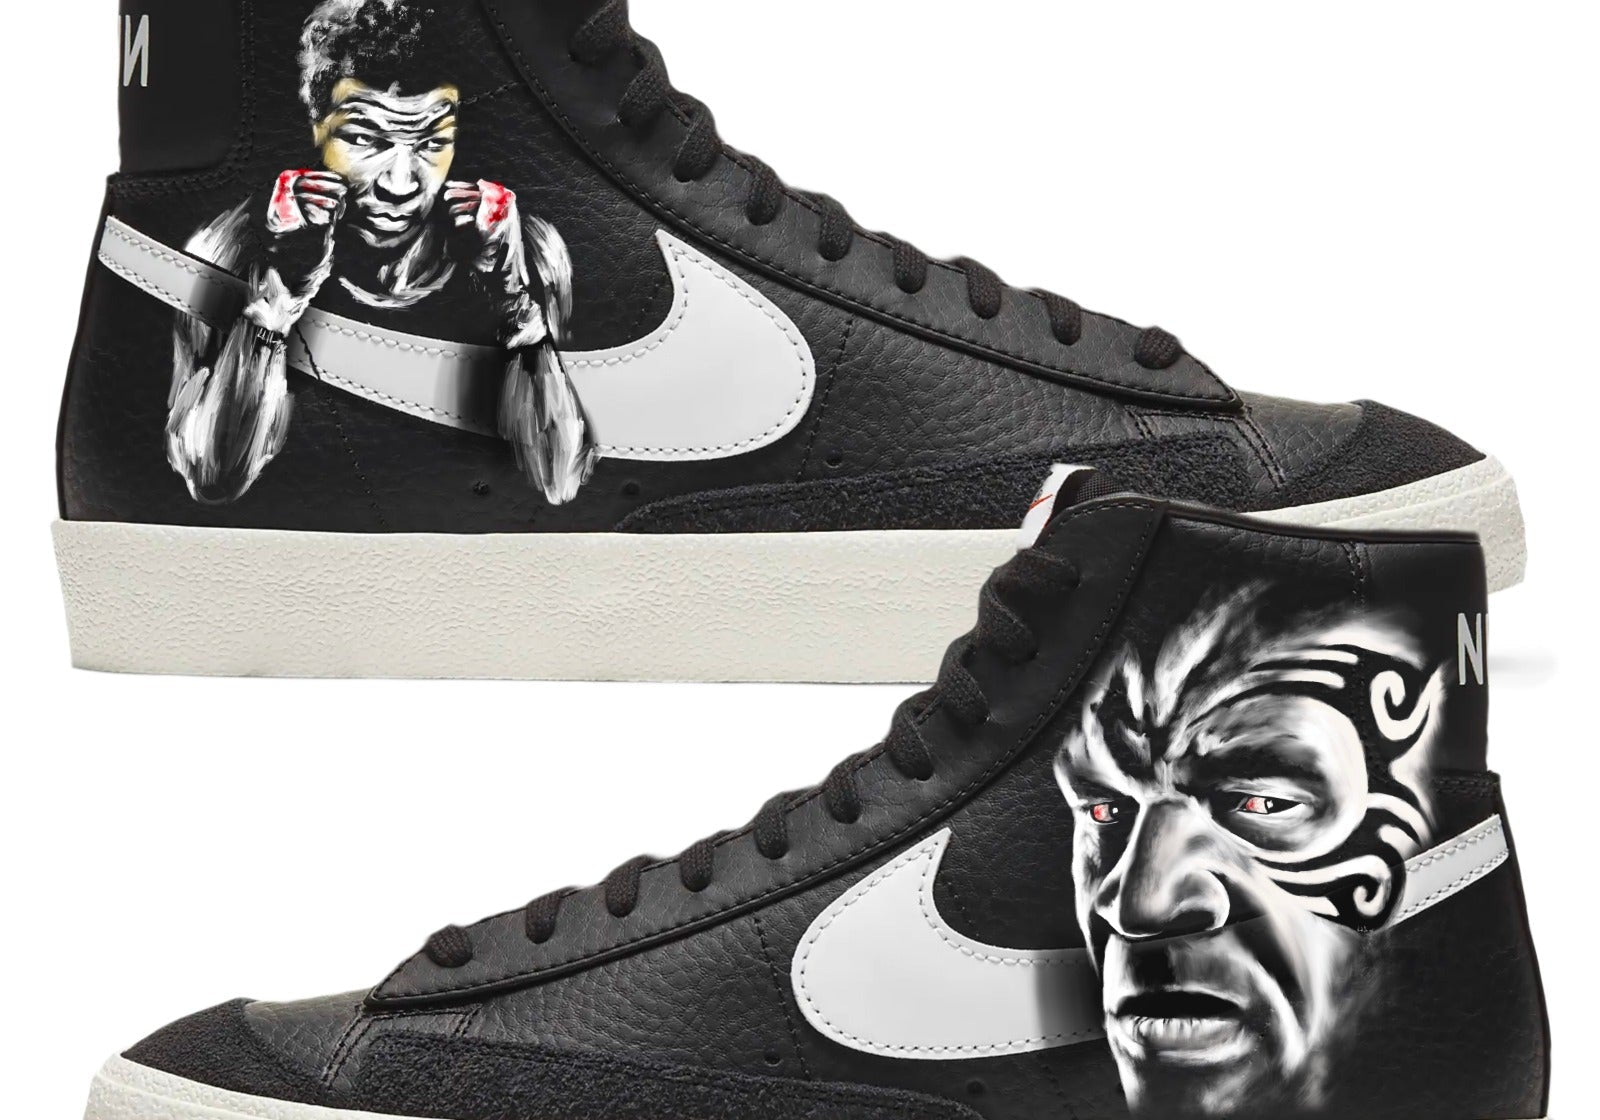 Nike Blazer Mid Sneakers | Black and White | "Iron Mike" - Androo's Art